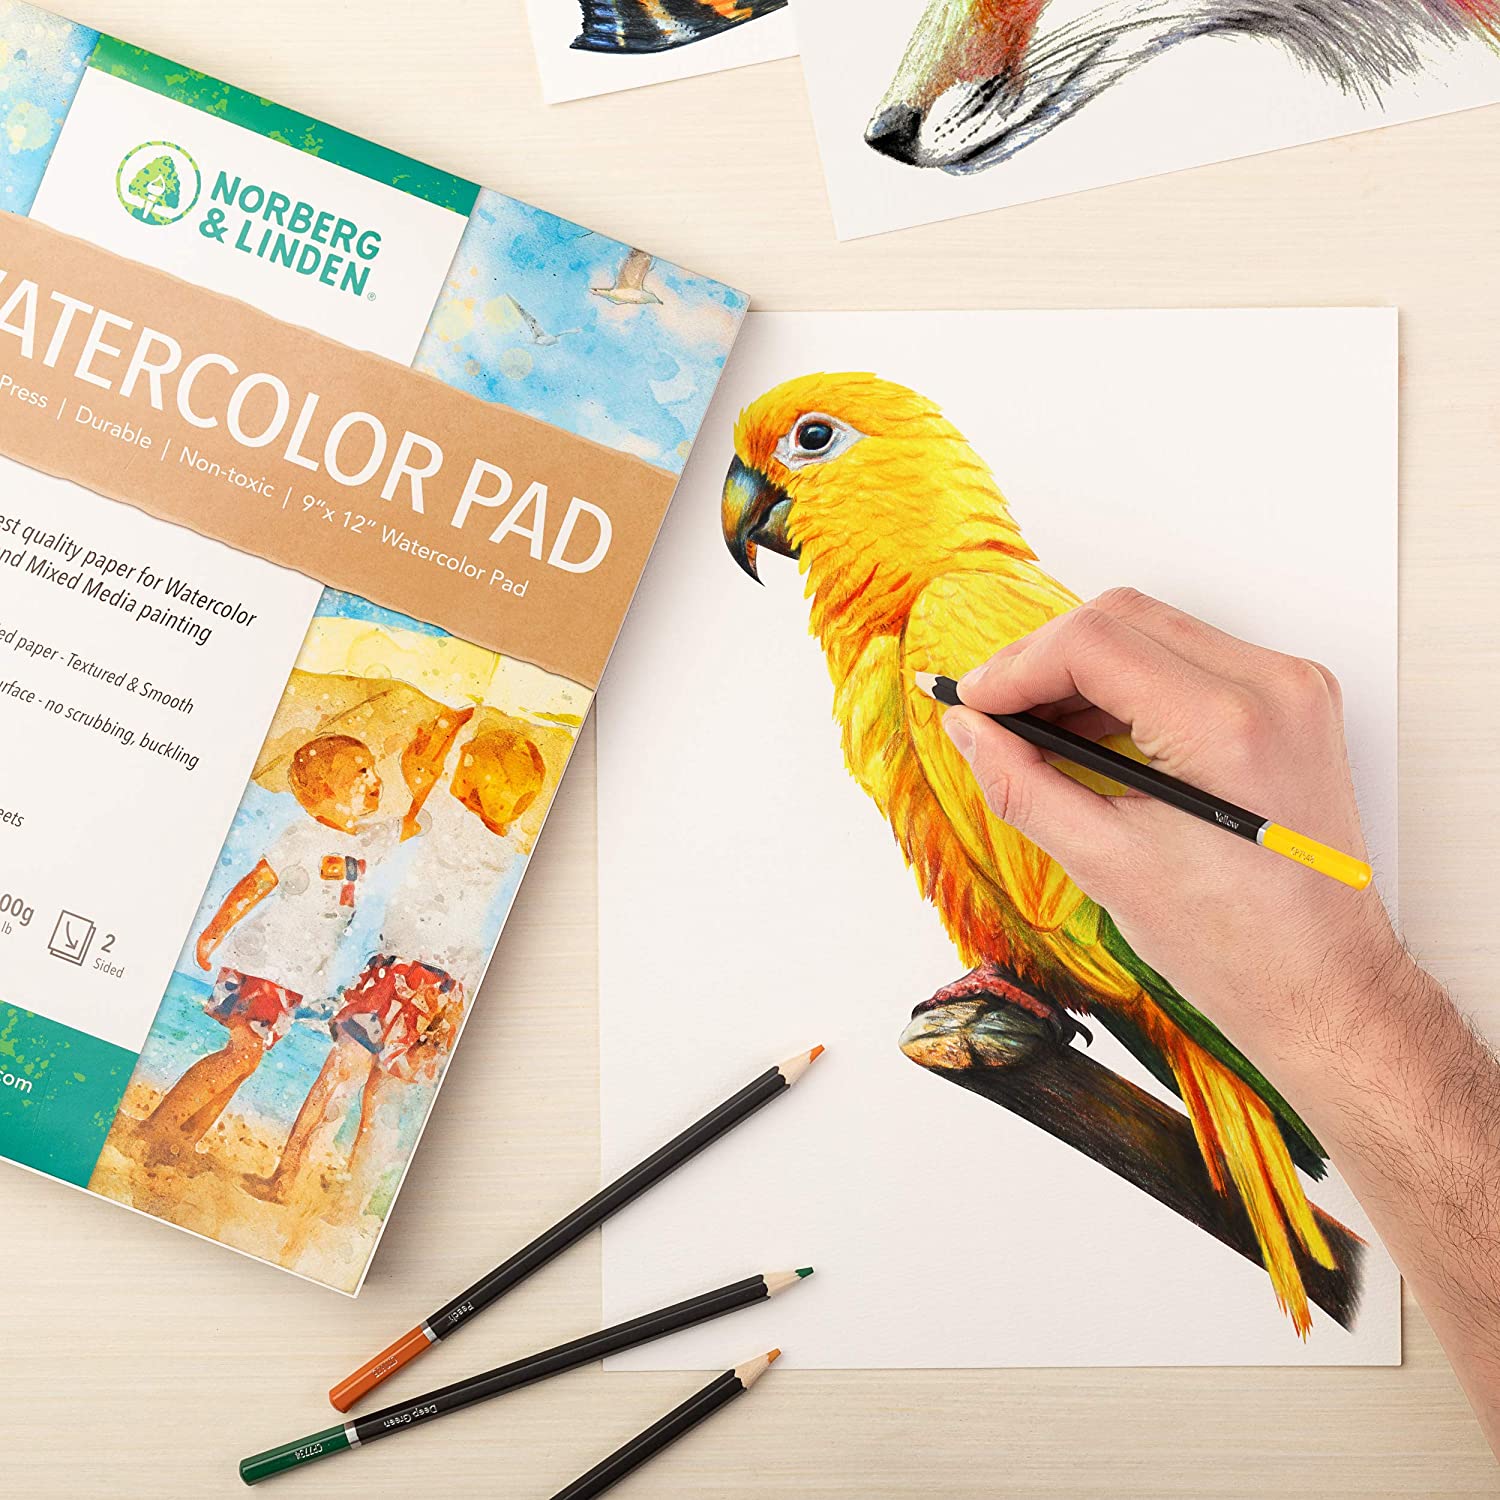 Linden Art Watercolor Journal [Full Product Review with